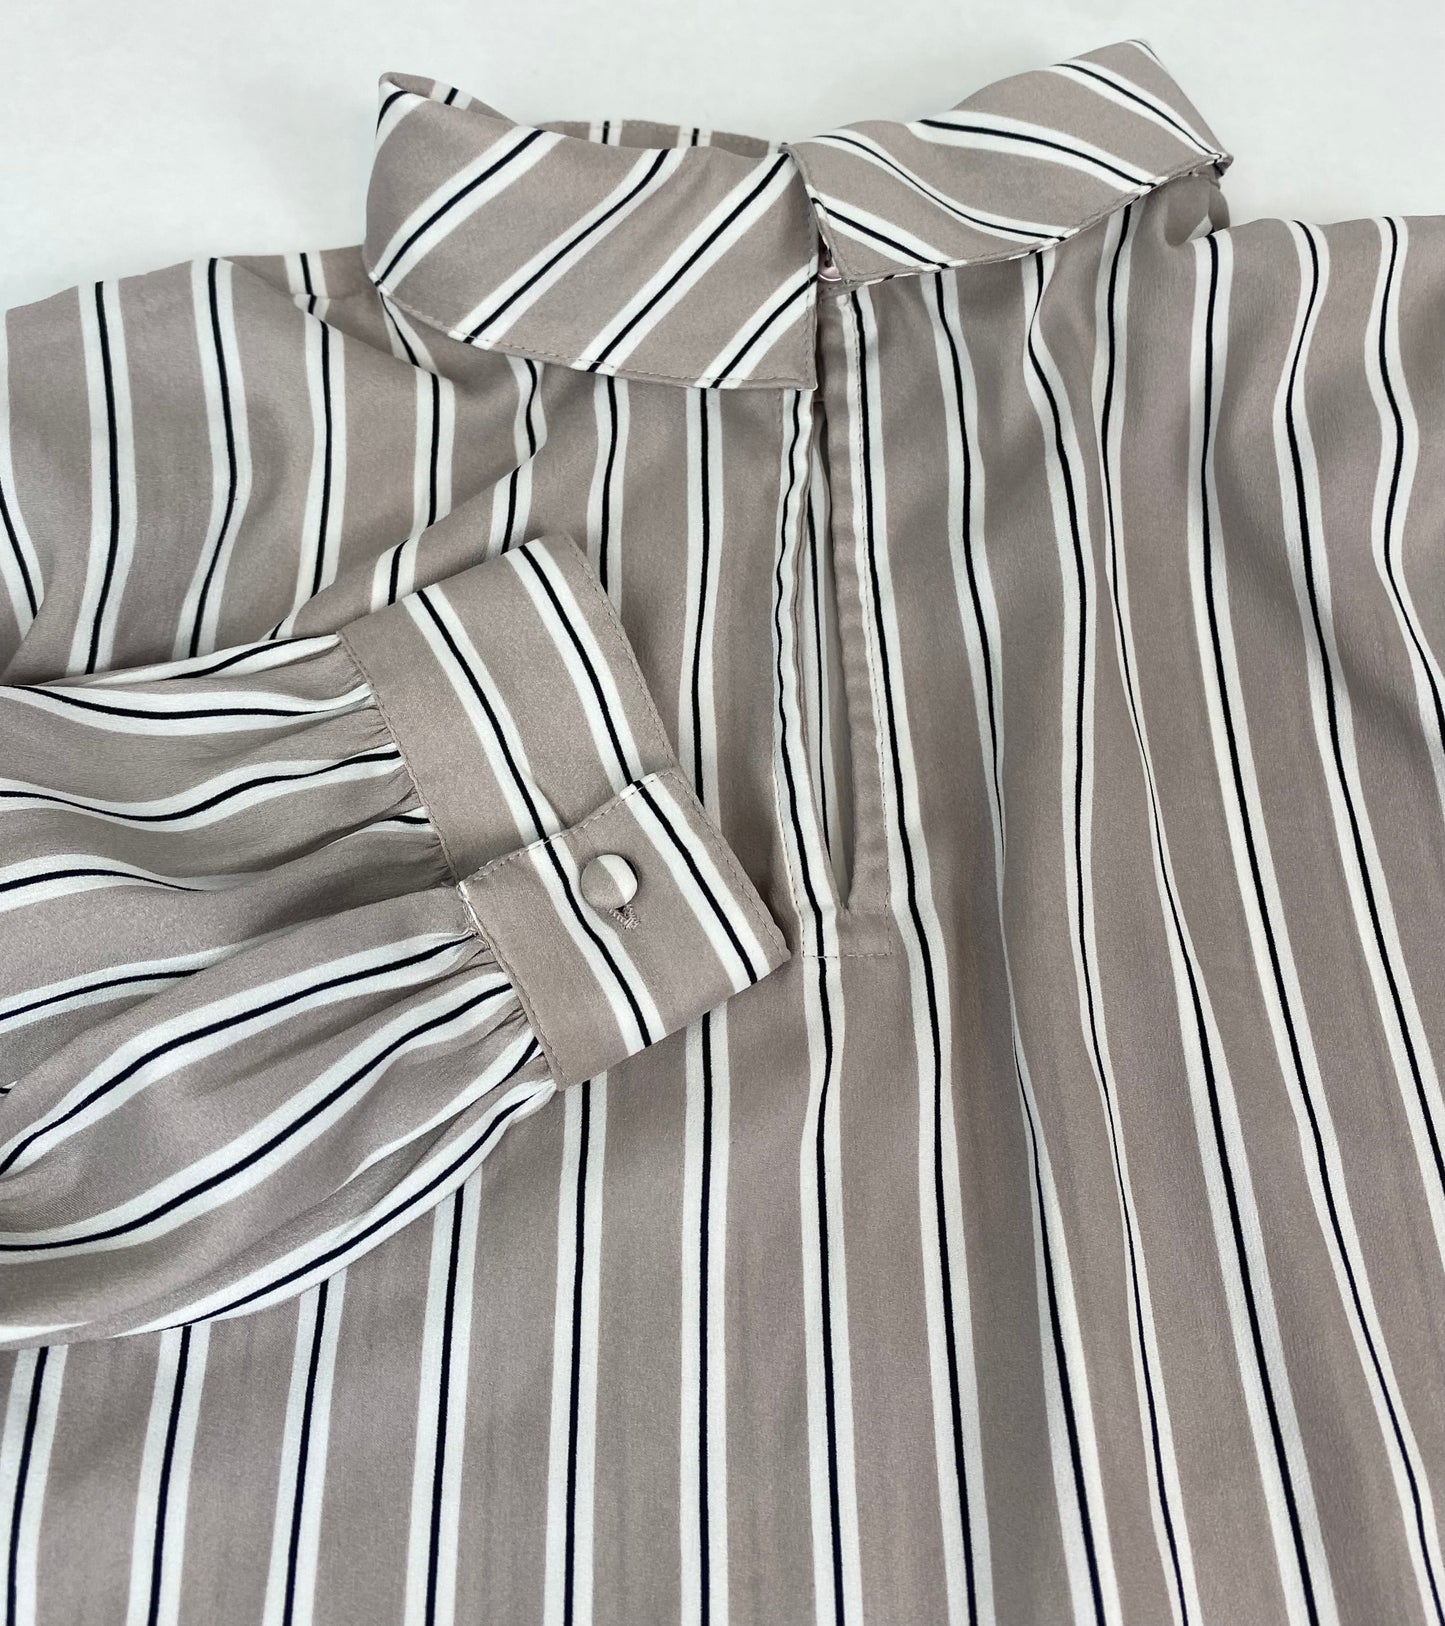 Women XS/S Ann Taylor striped long sleeve blouse-tan/black stripes with cuffs and folded collar detail